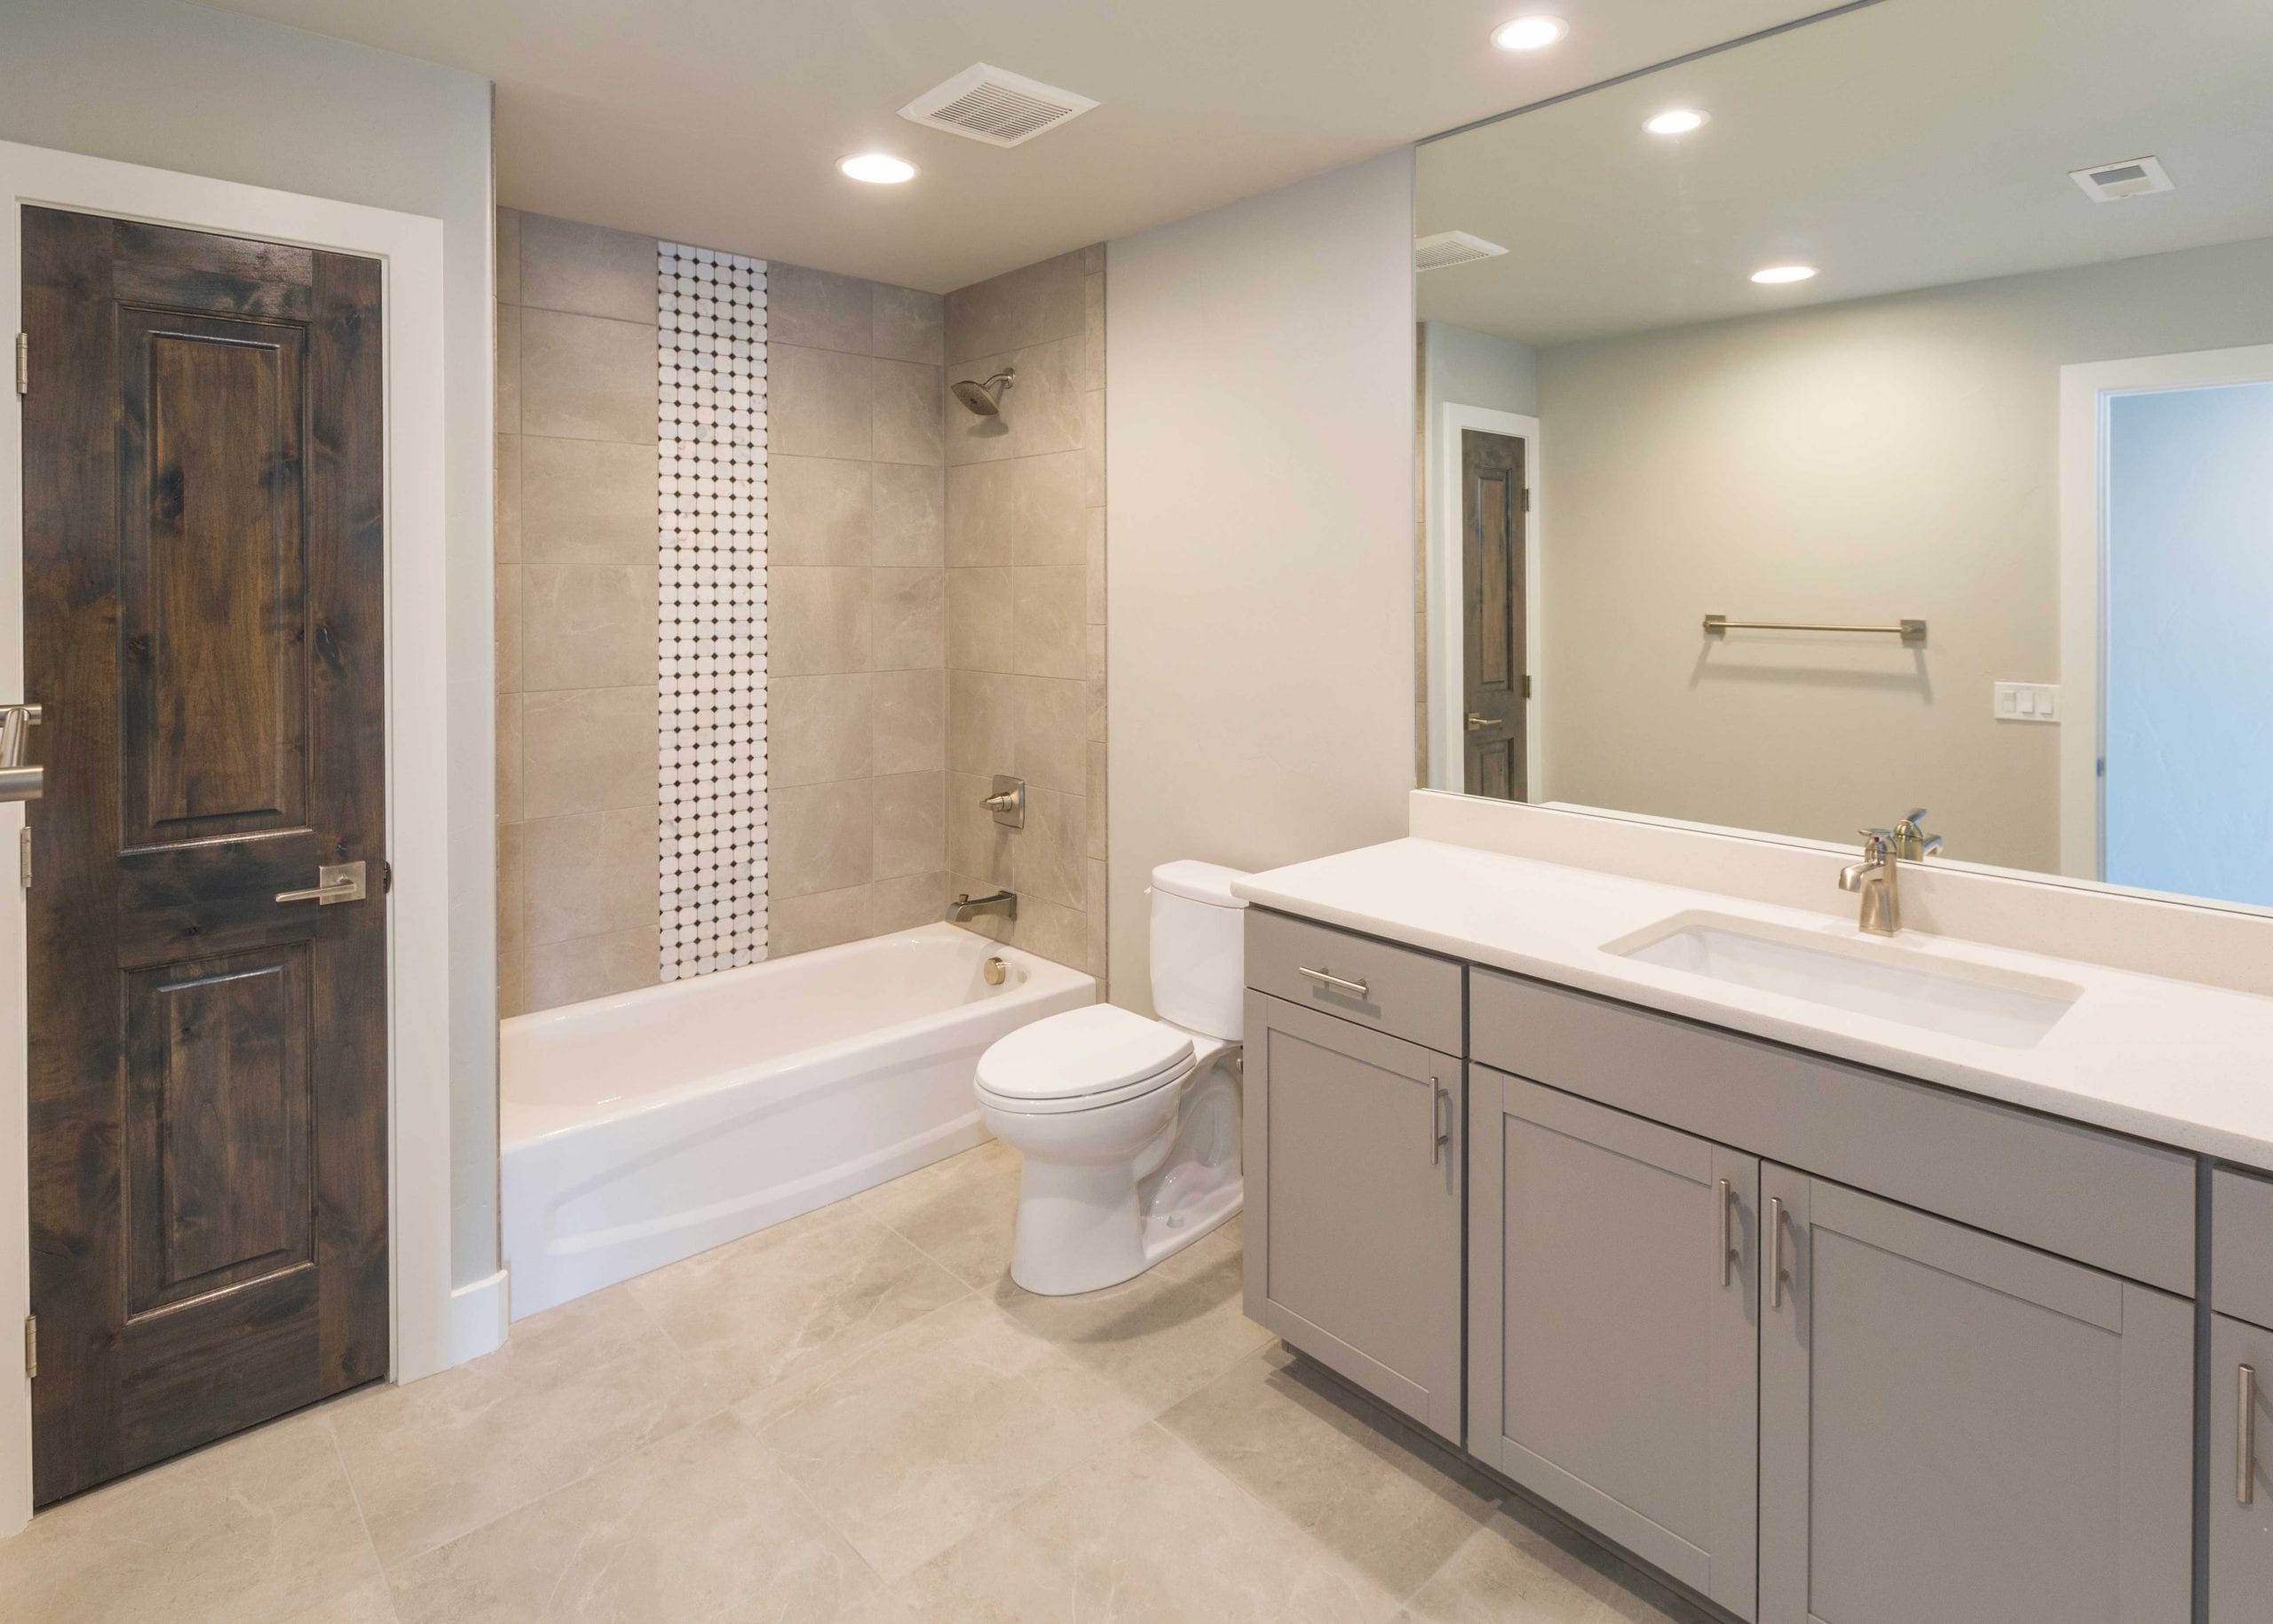 Local bathroom remodel experts can help add value to your home.